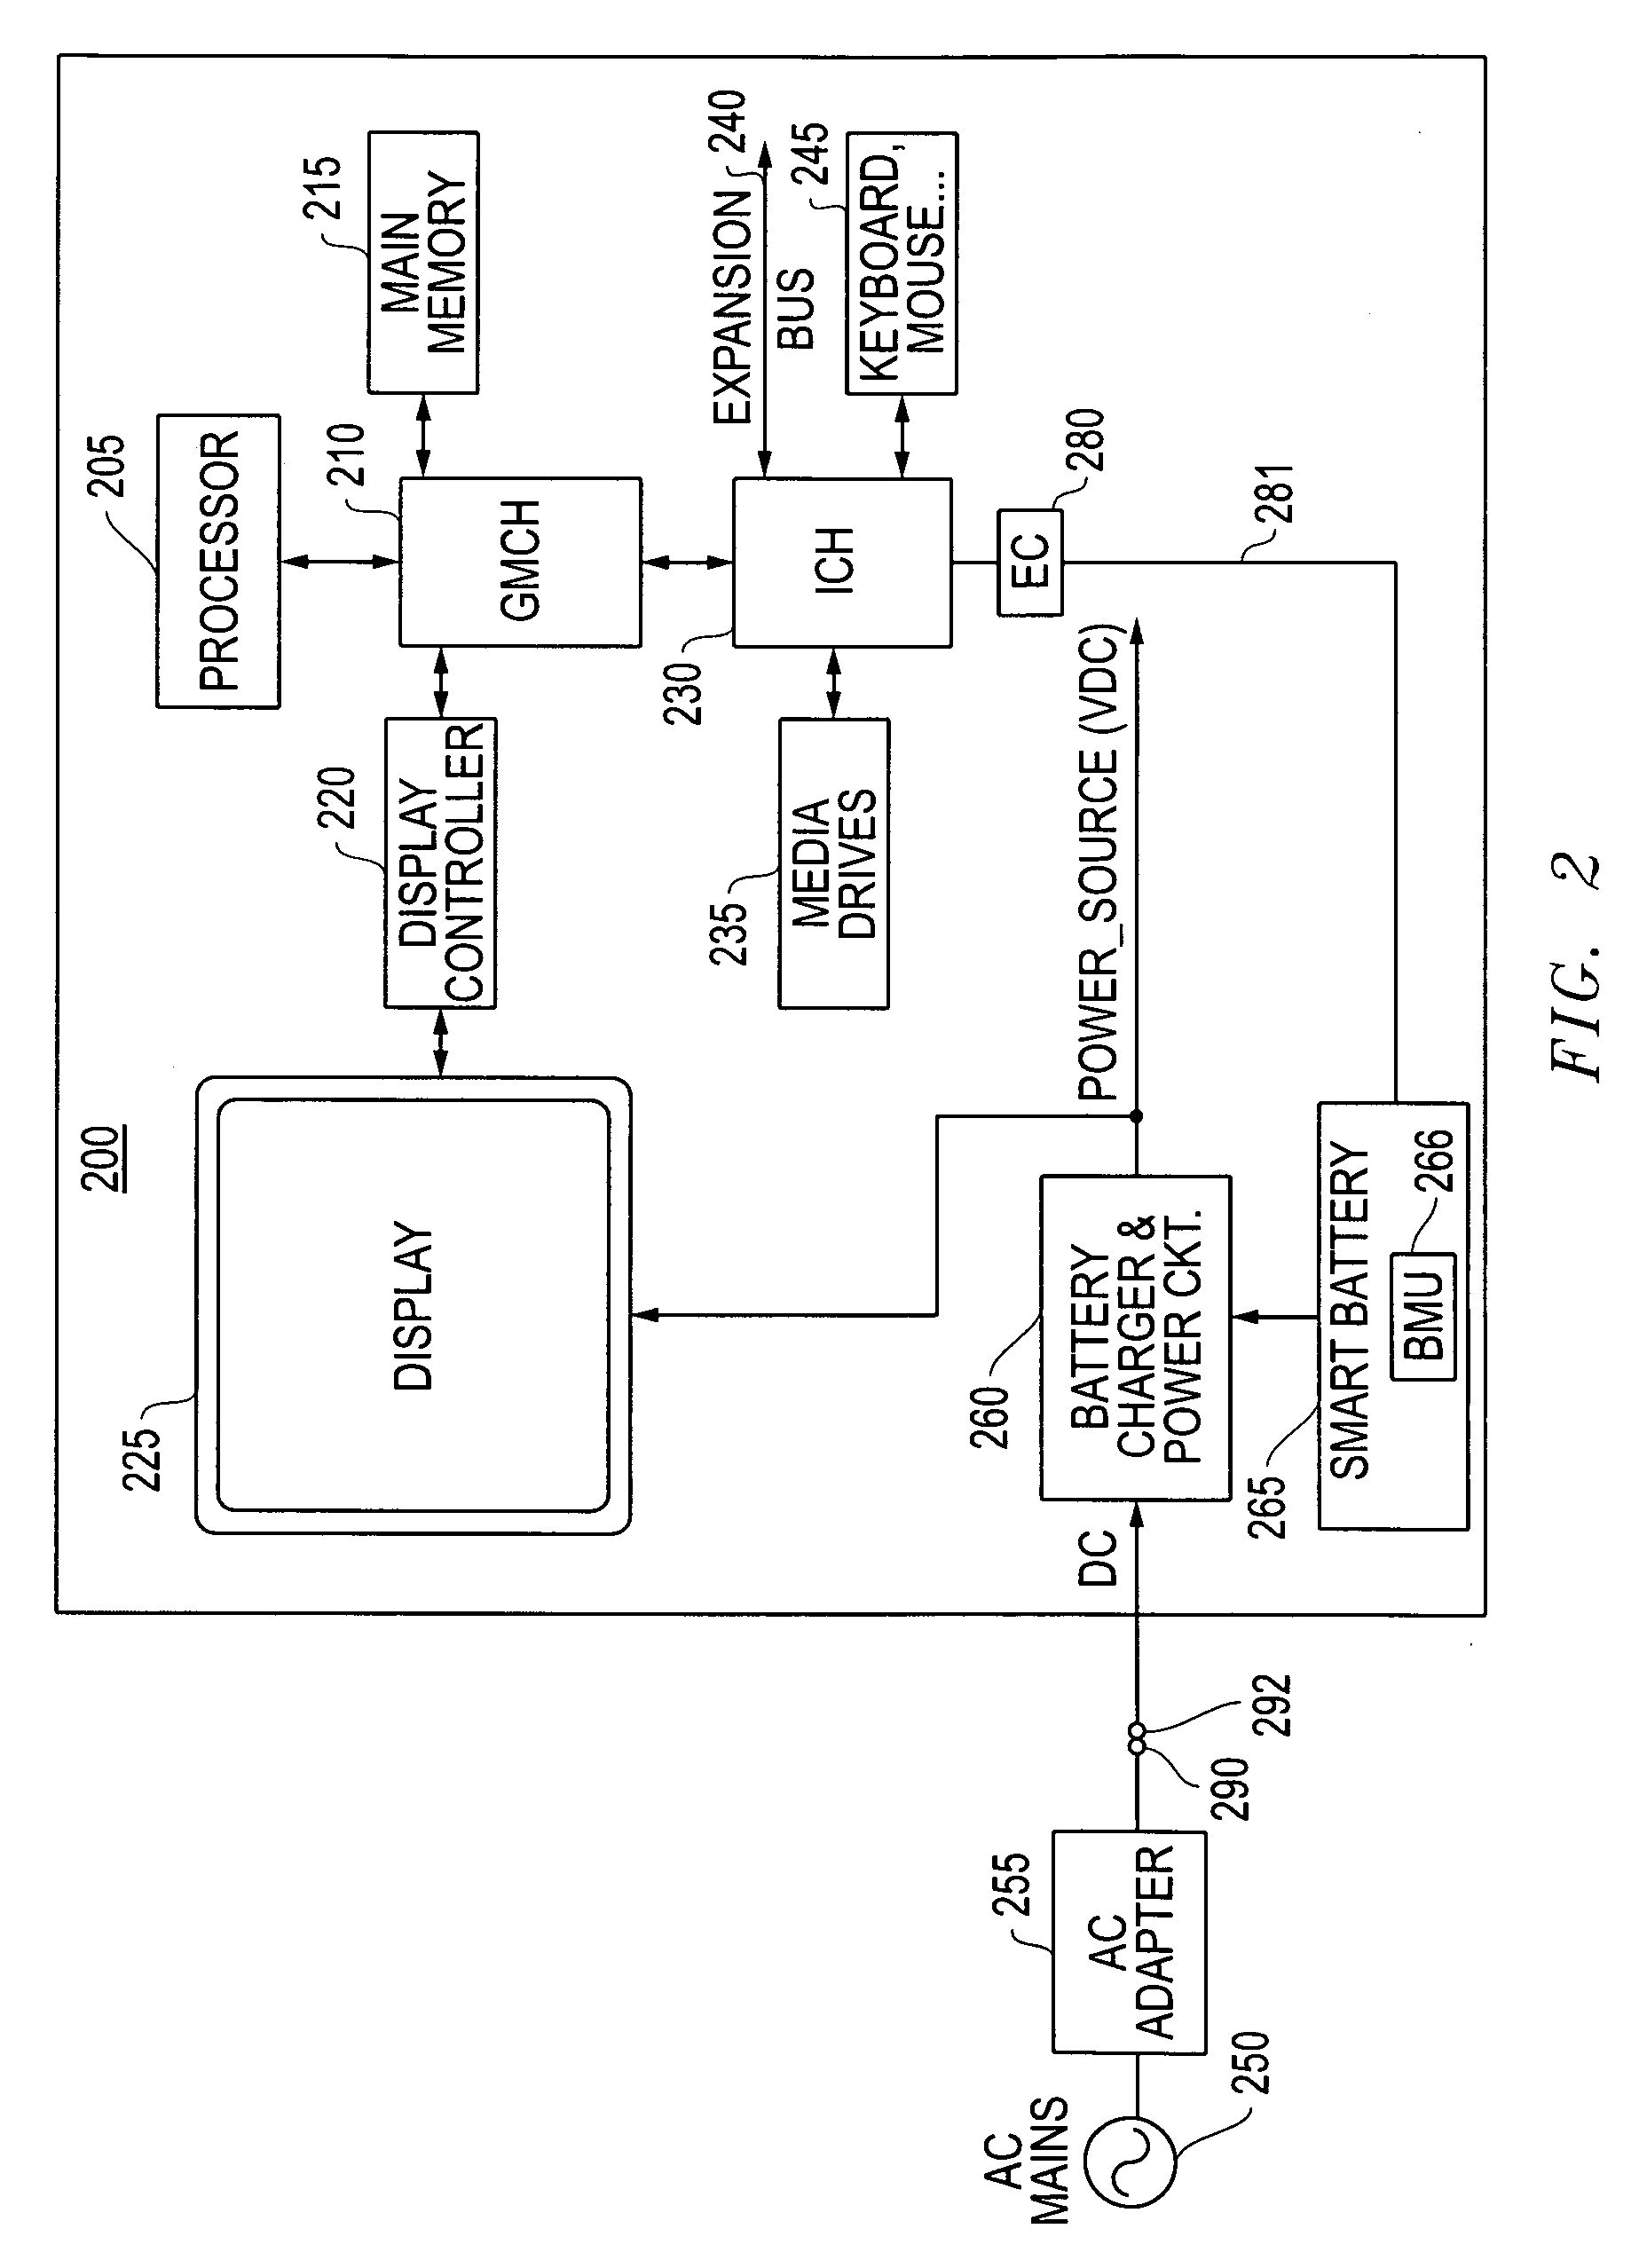 Systems and methods for waking up a battery system